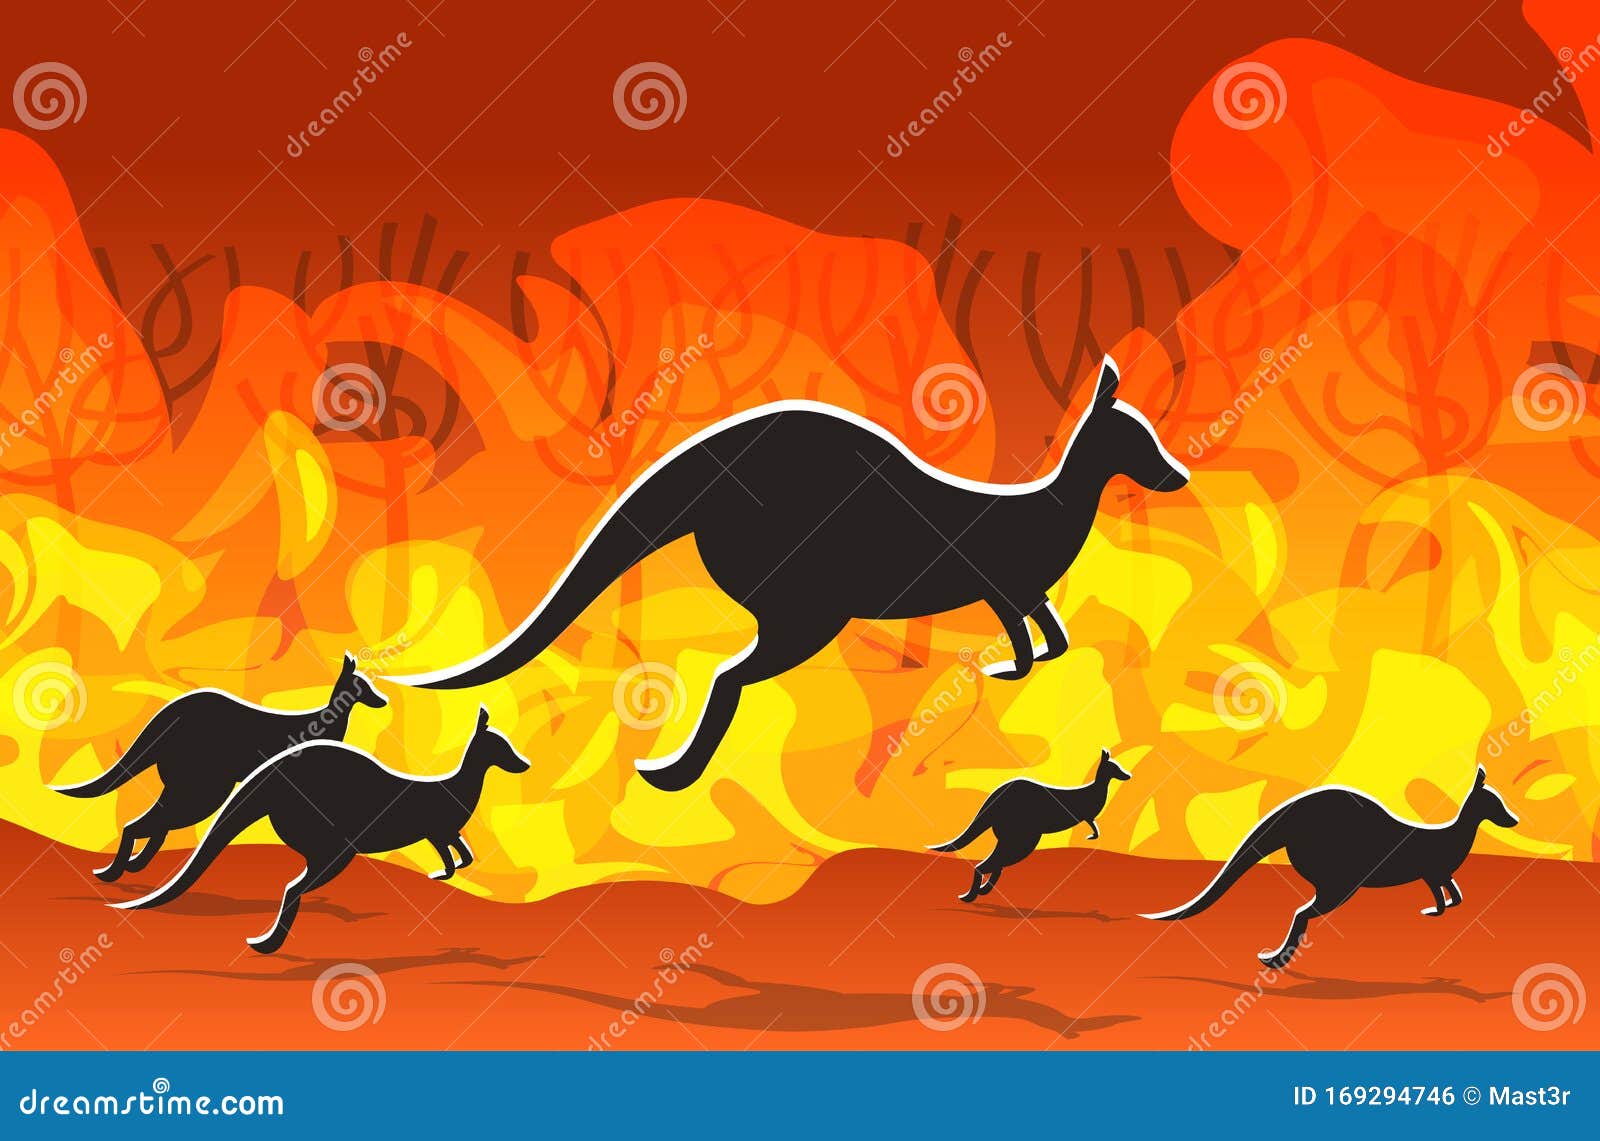 Kangaroo Running from Forest Fires in Australia Animals Dying in Wildfire  Bushfire Burning Trees Natural Disaster Stock Vector - Illustration of  cartoon, disaster: 169294746